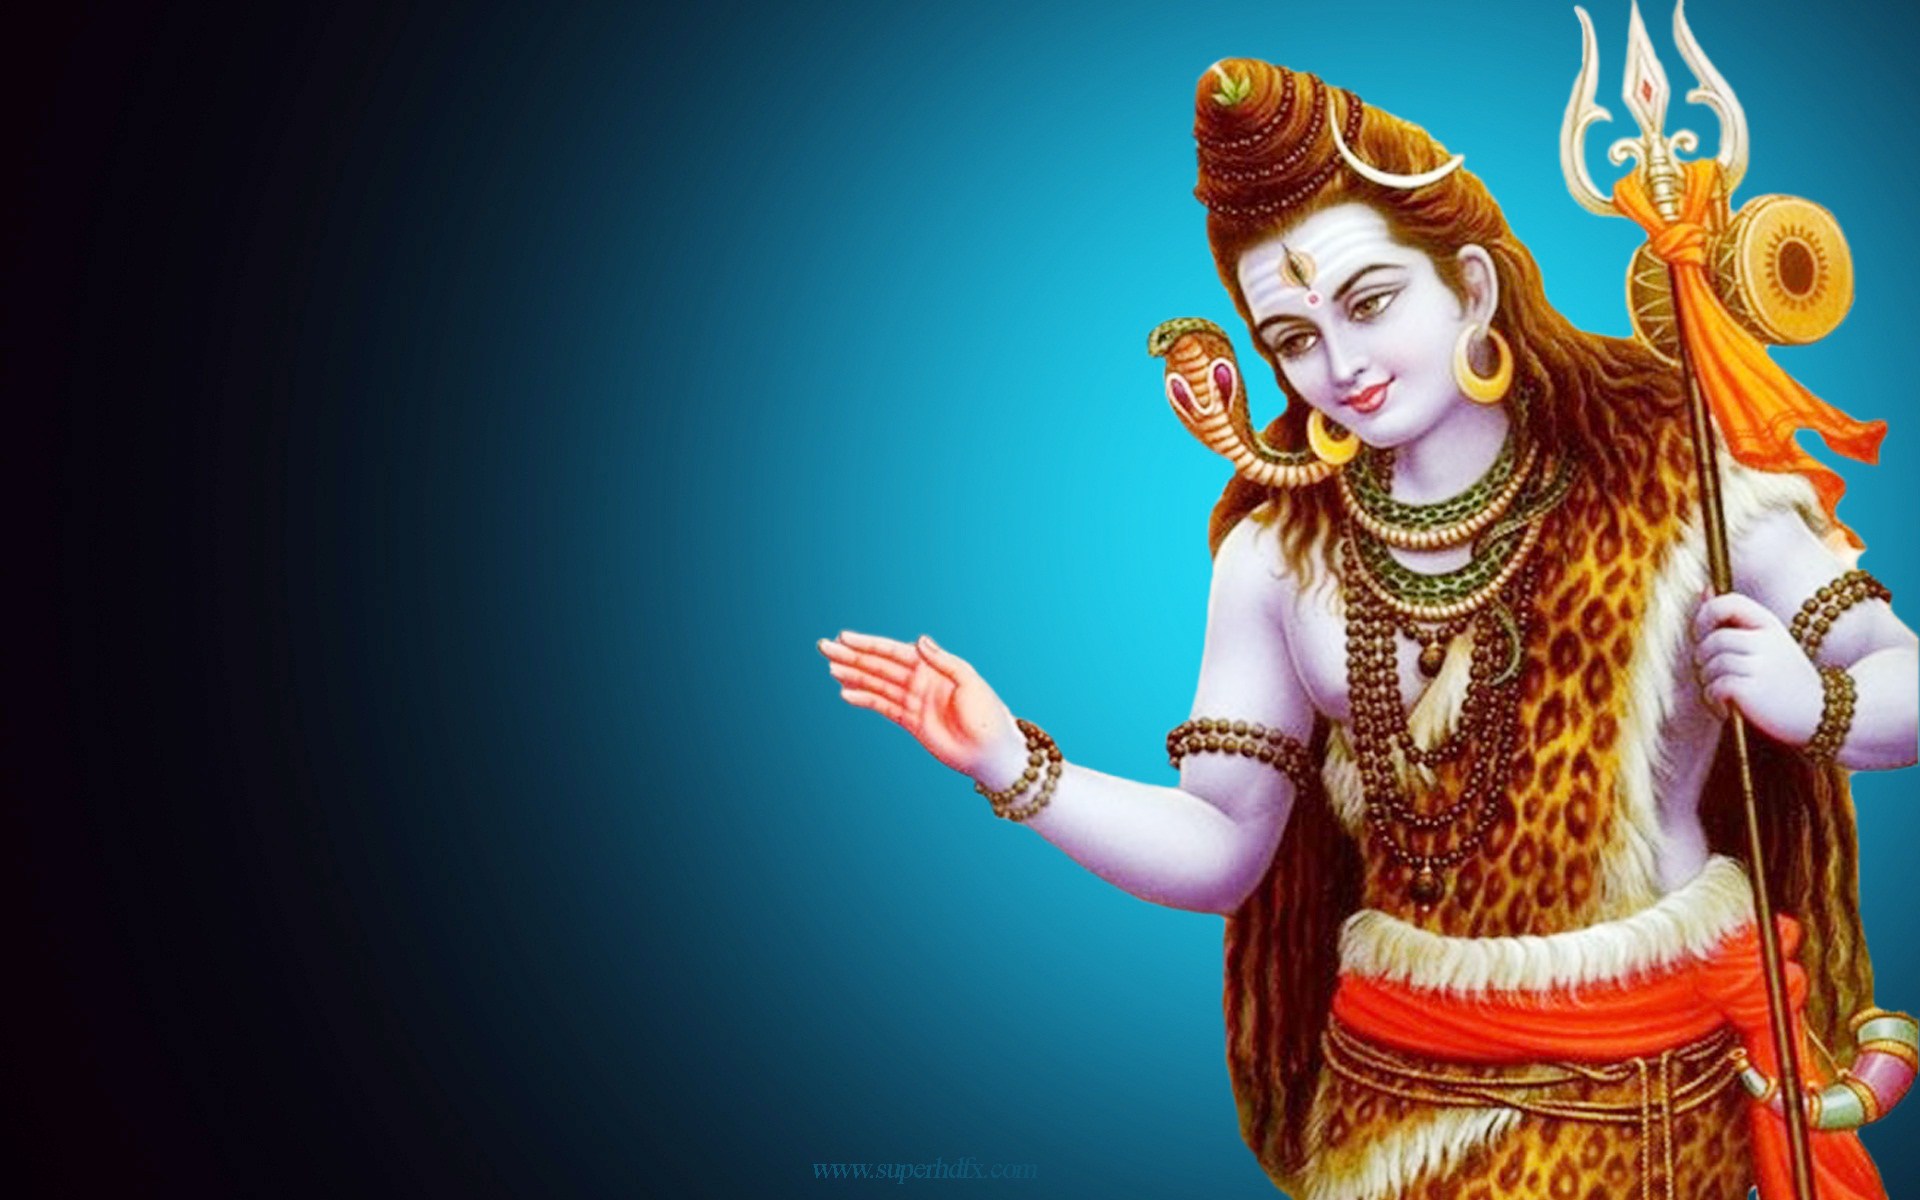 Download Free Hd Wallpapers Photos Images Of Bhagwan - vrogue.co